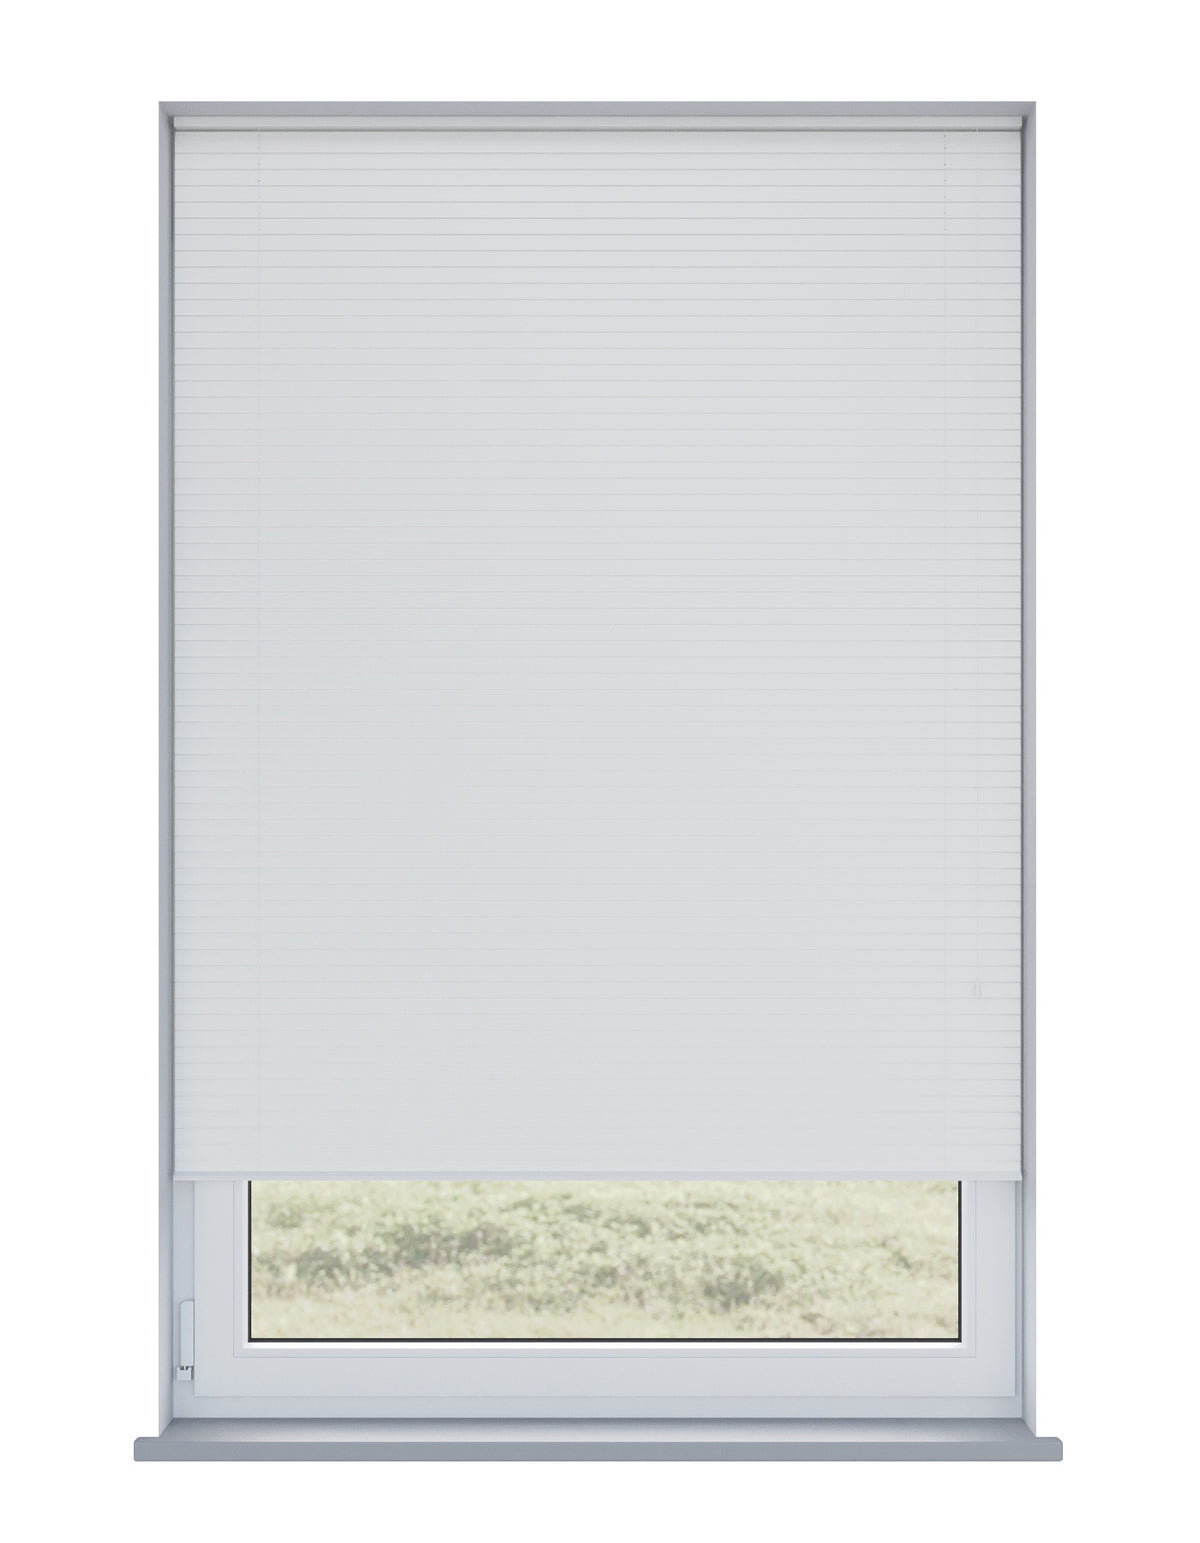 Expressions Essence Glow White Wooden Blind